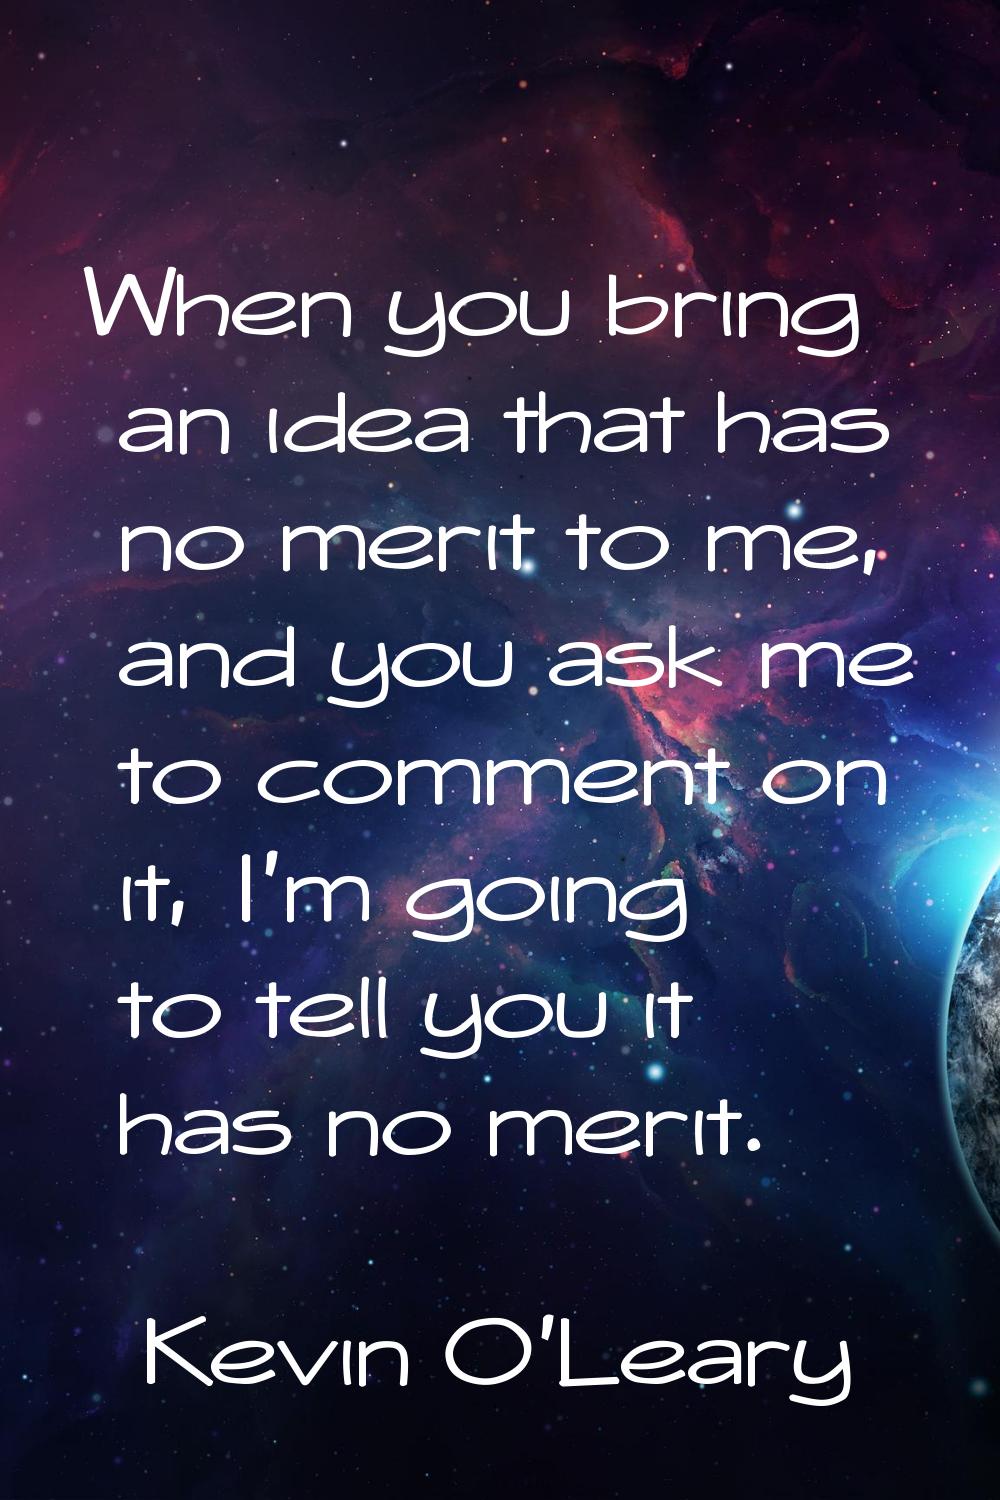 When you bring an idea that has no merit to me, and you ask me to comment on it, I'm going to tell 